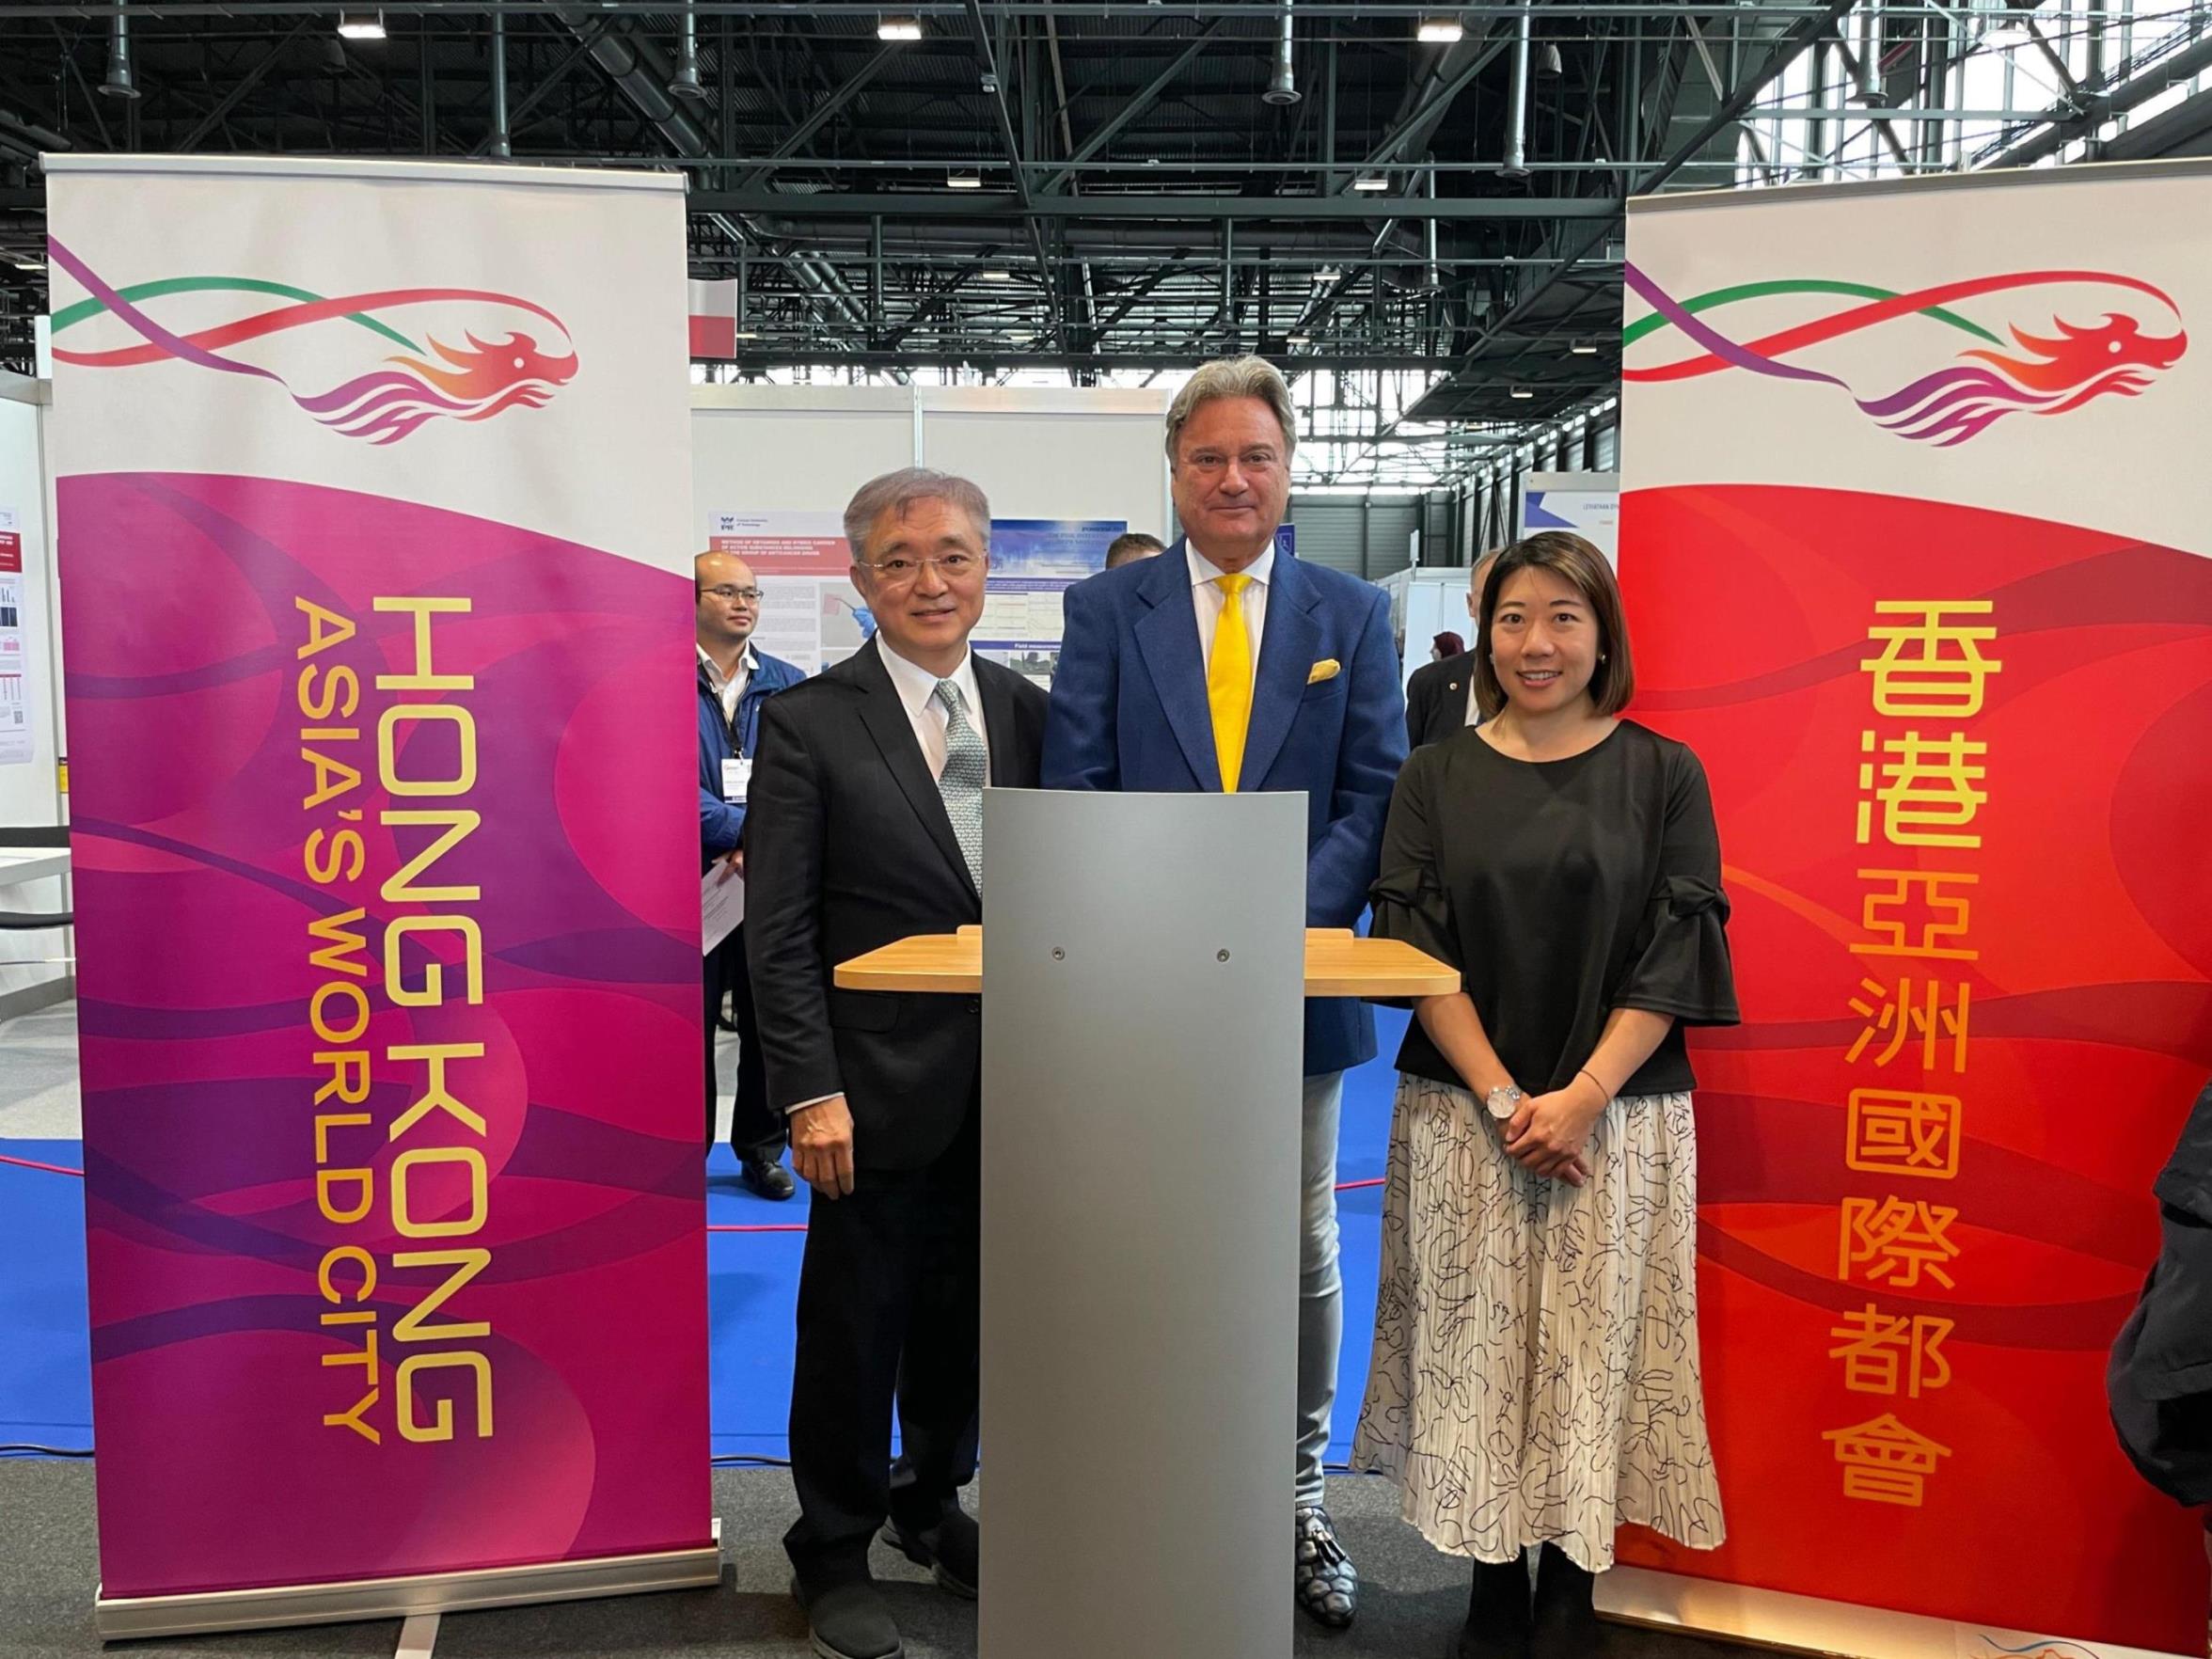 The representative of the Hong Kong delegation, Professor Andrew Young (left); the President of the Jury of the International Exhibition of Inventions of Geneva, Mr David Taji Farouki (centre); and the Director of the Hong Kong Economic and Trade Office, Berlin, Ms Jenny Szeto, are pictured at the 49th International Exhibition of Inventions of Geneva.